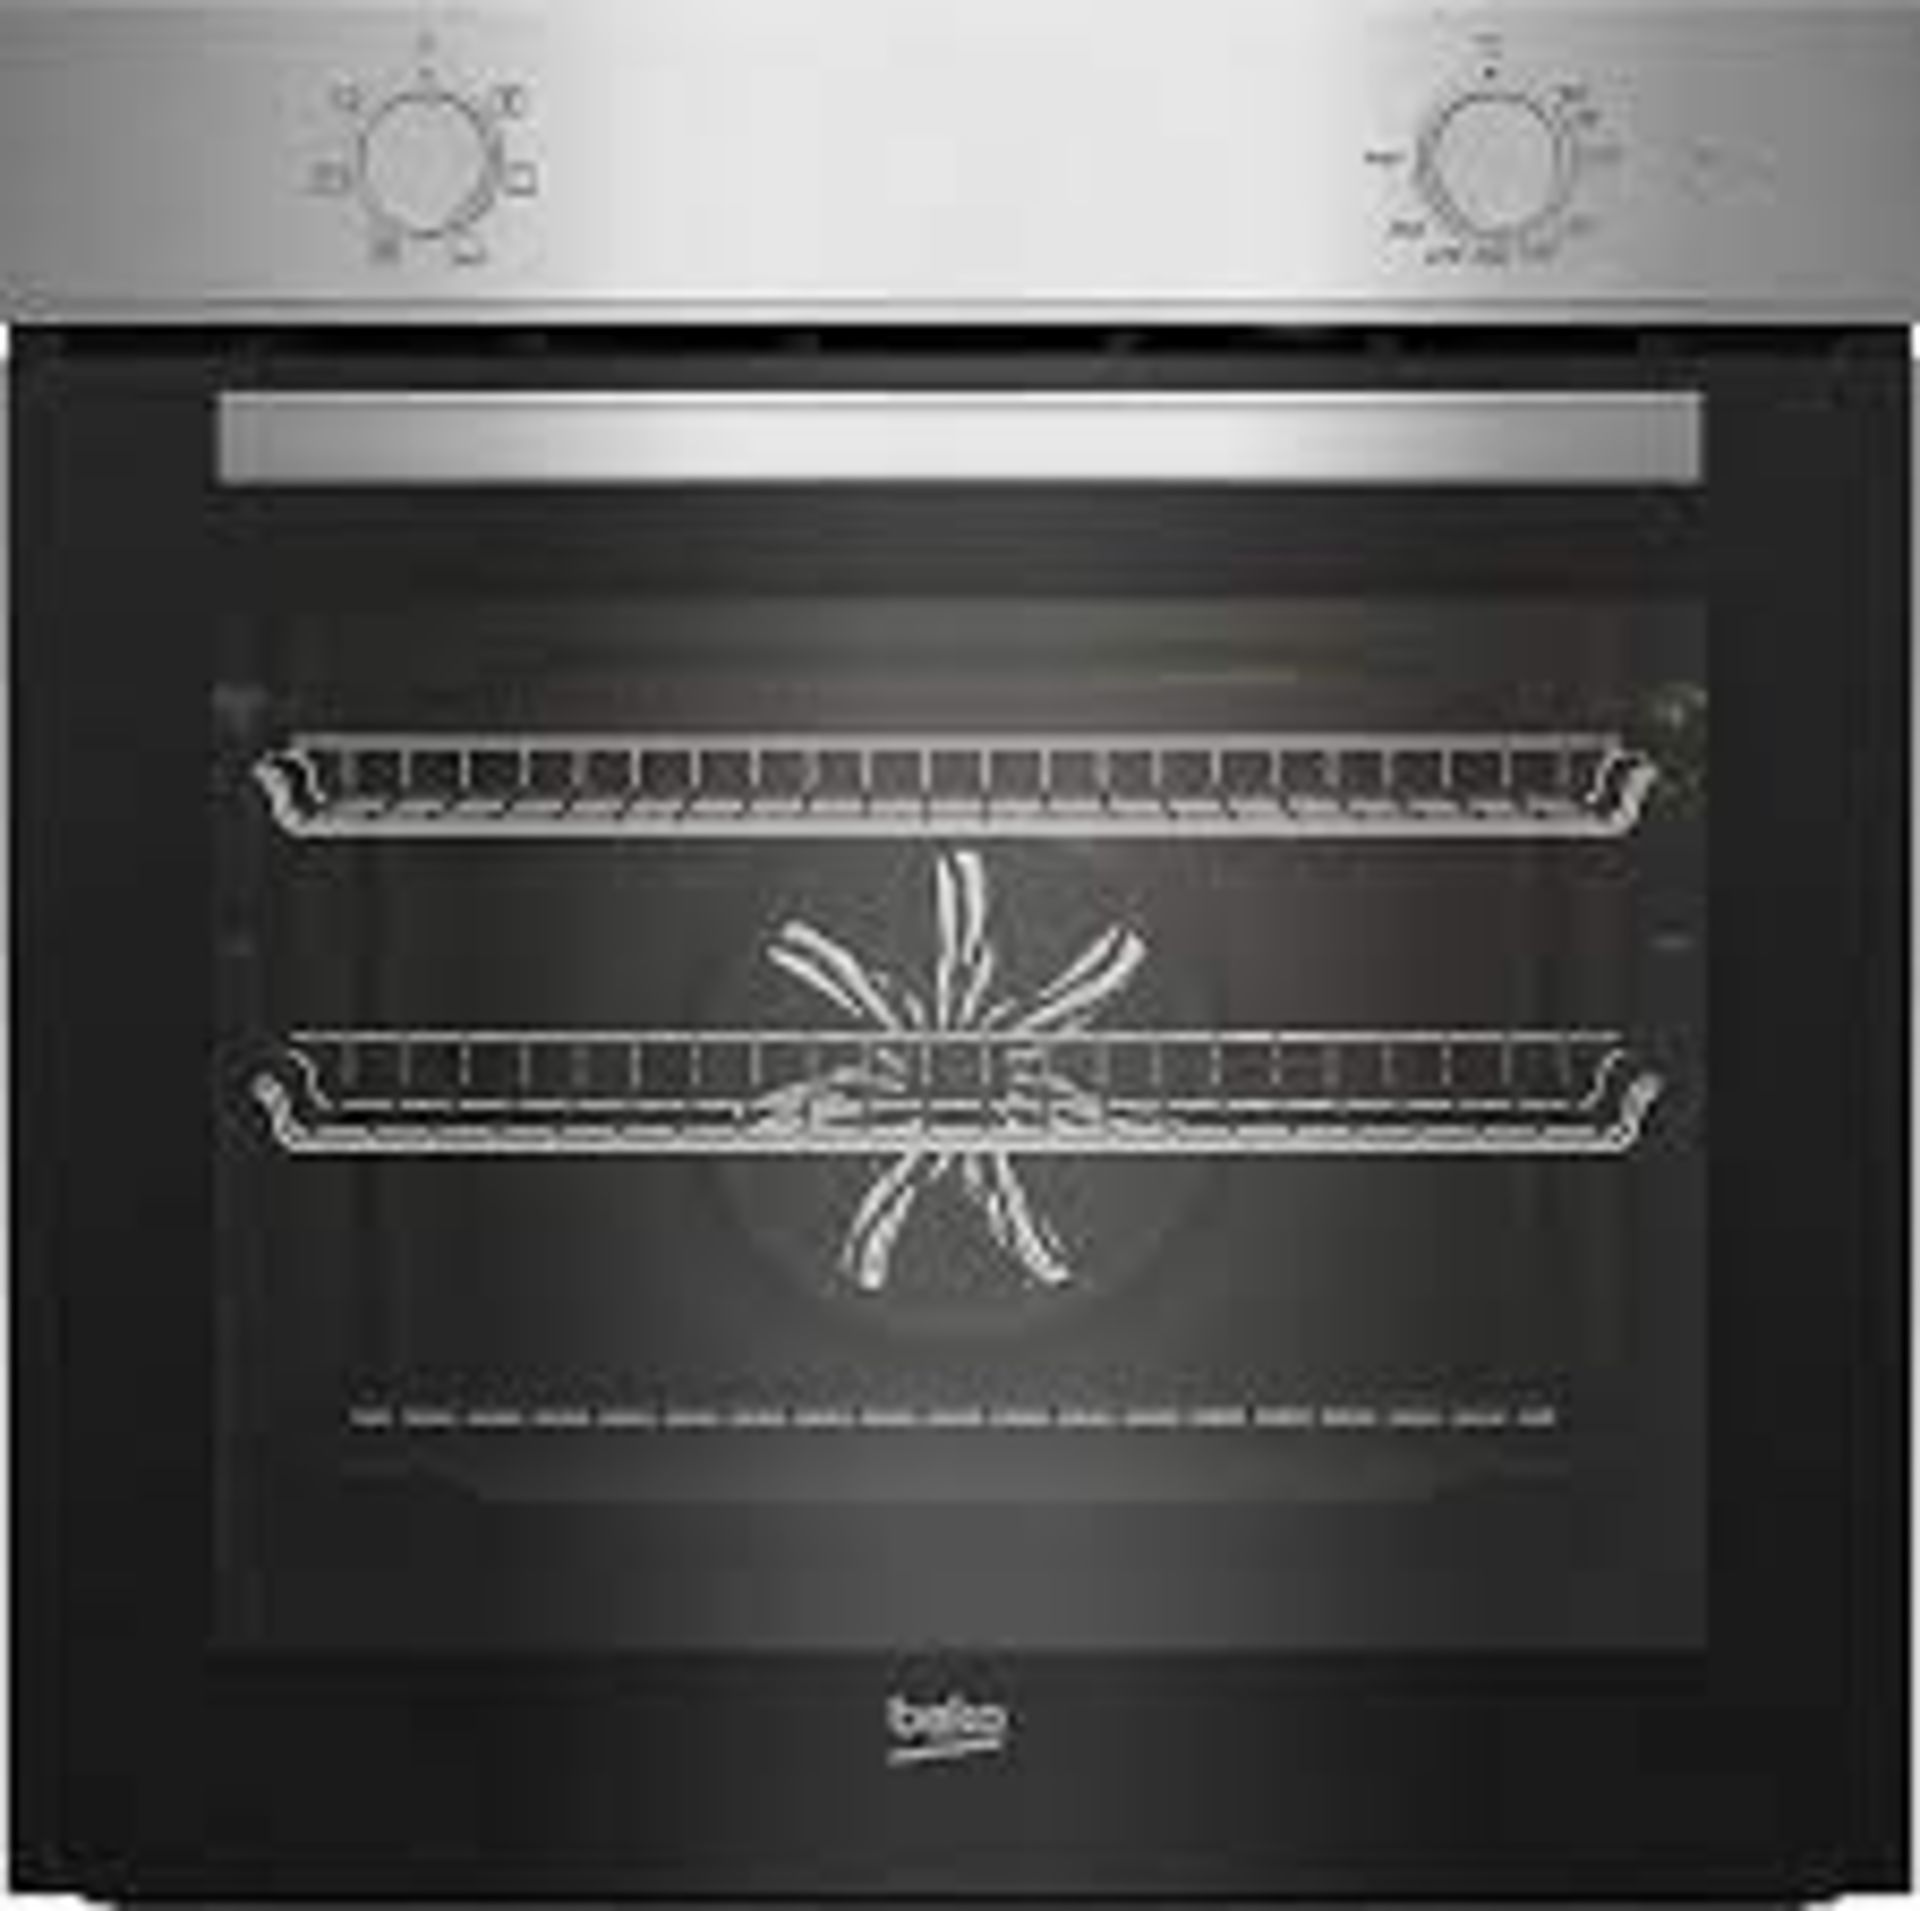 Beko QBSE222X Built-in Multifunction Oven. - ER47. Bake perfect cupcakes, roast a delicious Sunday